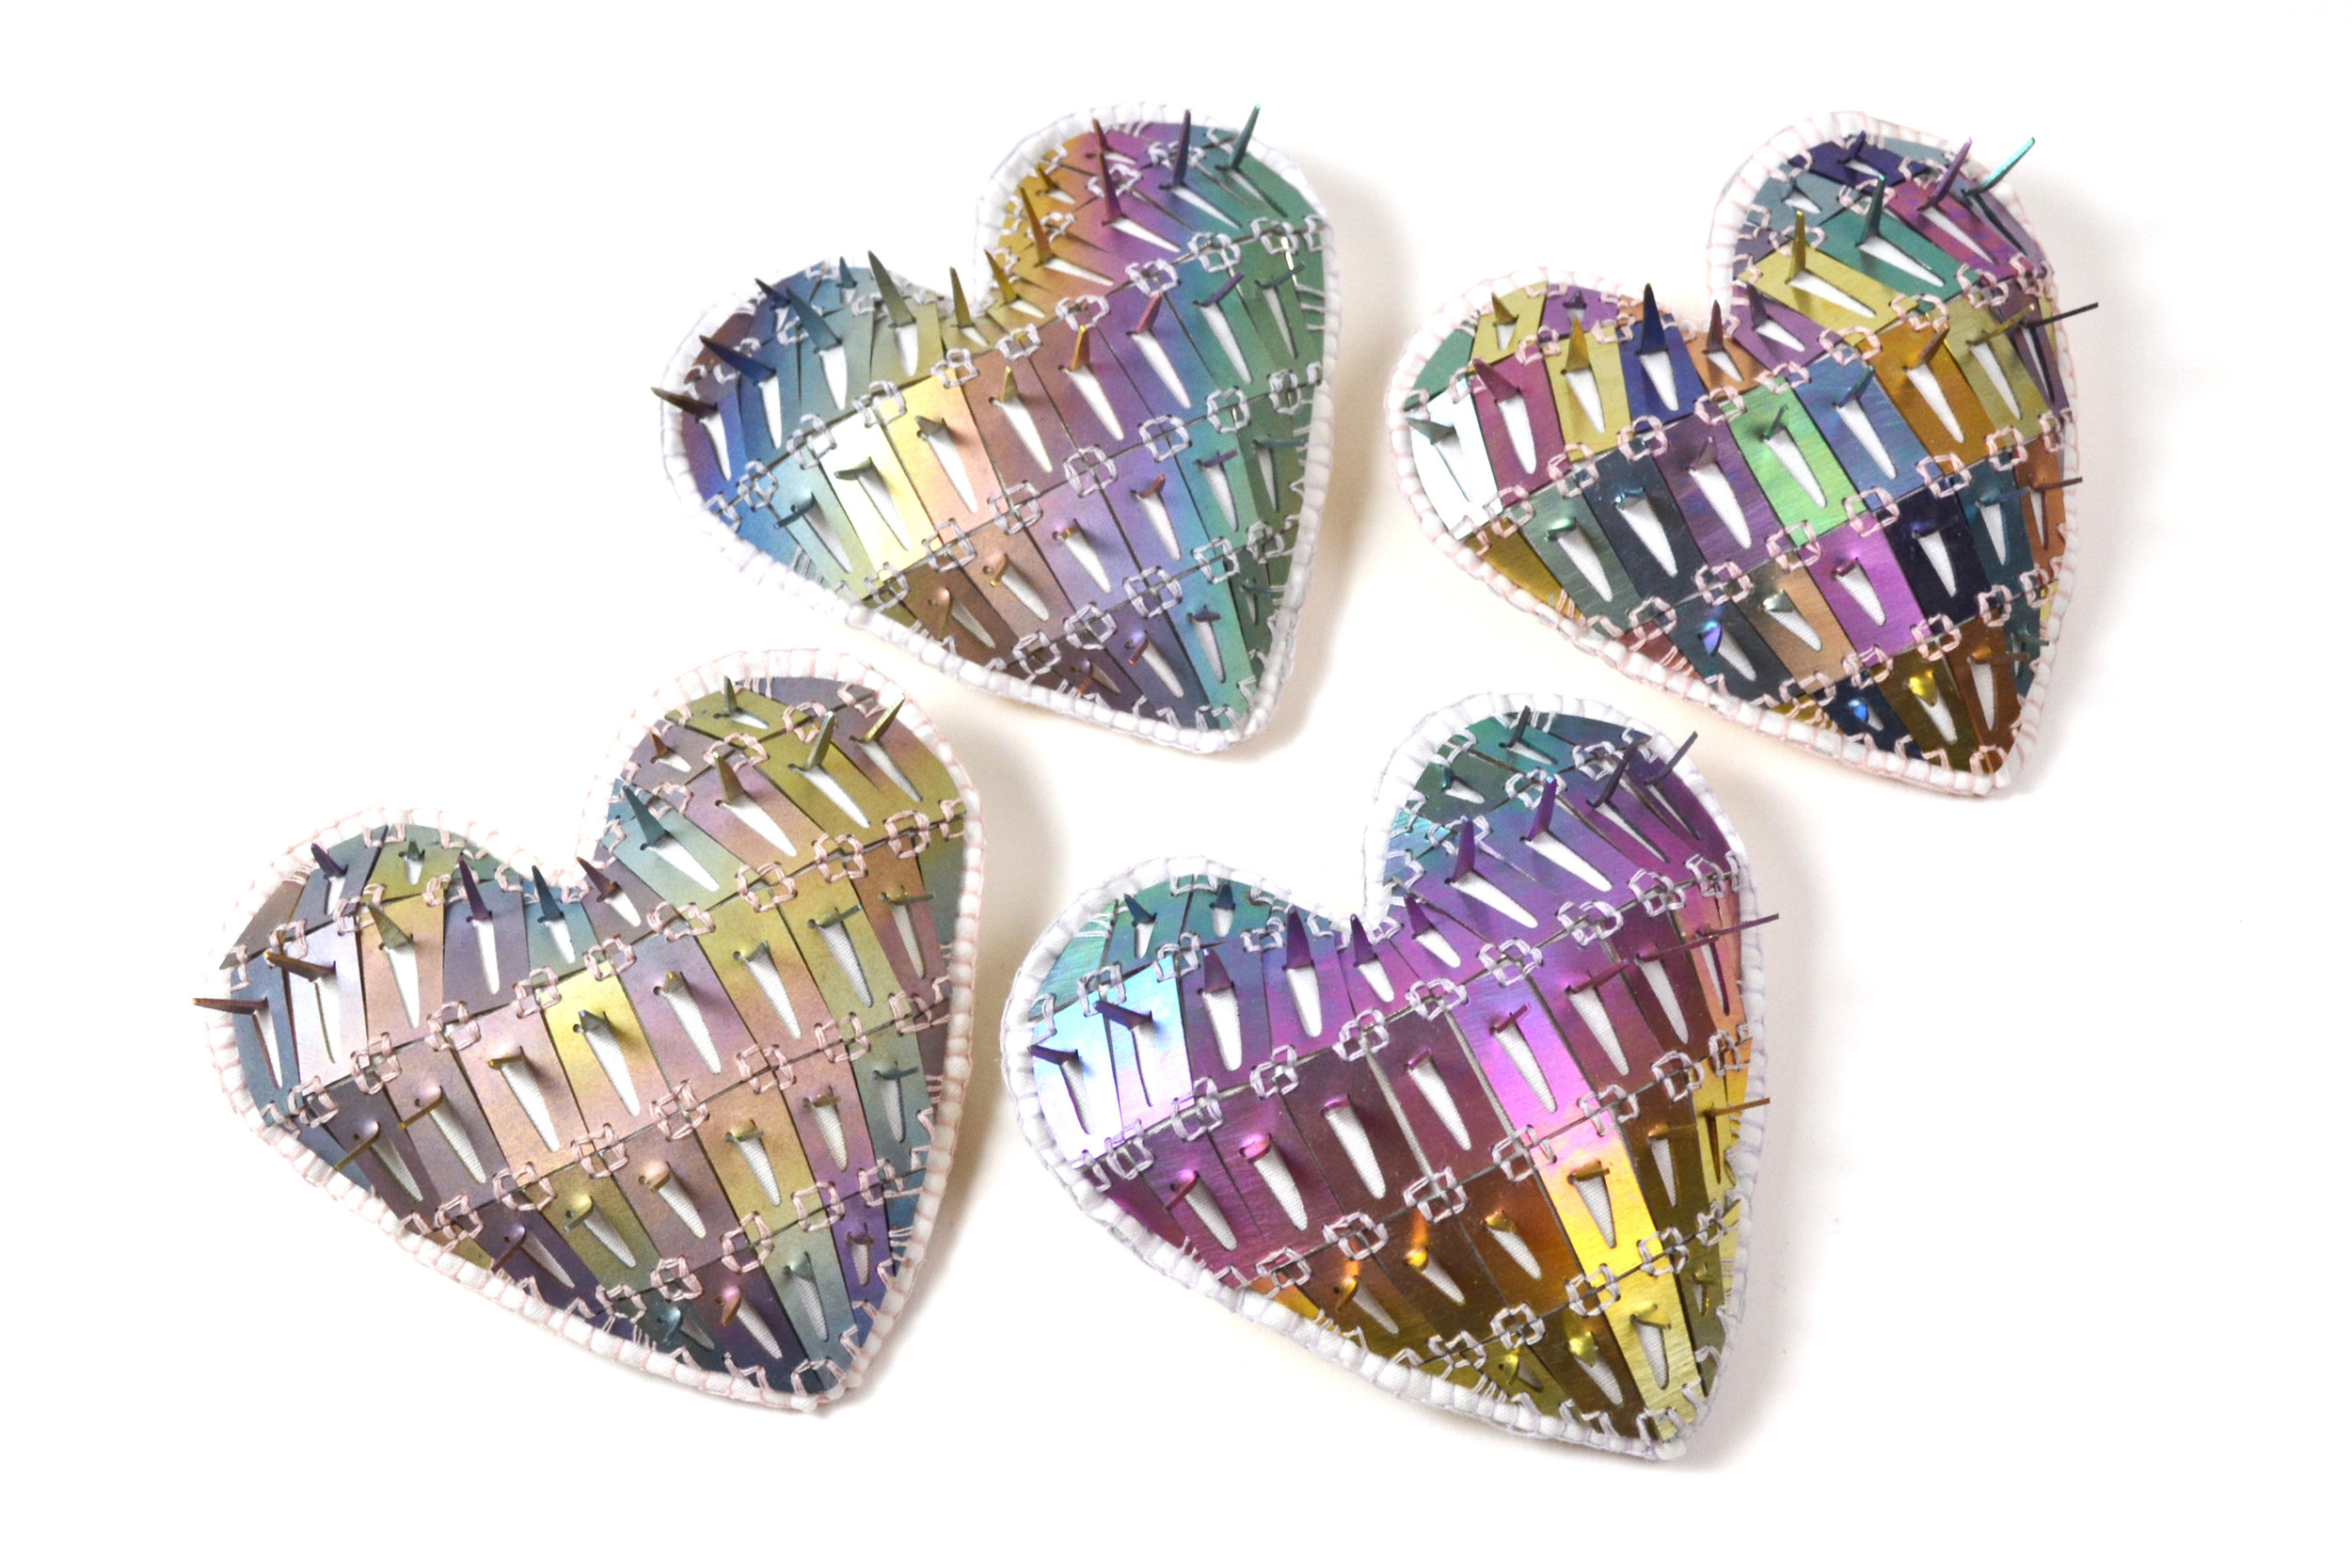   Prismatic Spikey Hearts   Anodized Titanium, Sterling Silver, Leather, Cotton, Thread  3”x3”x1” 